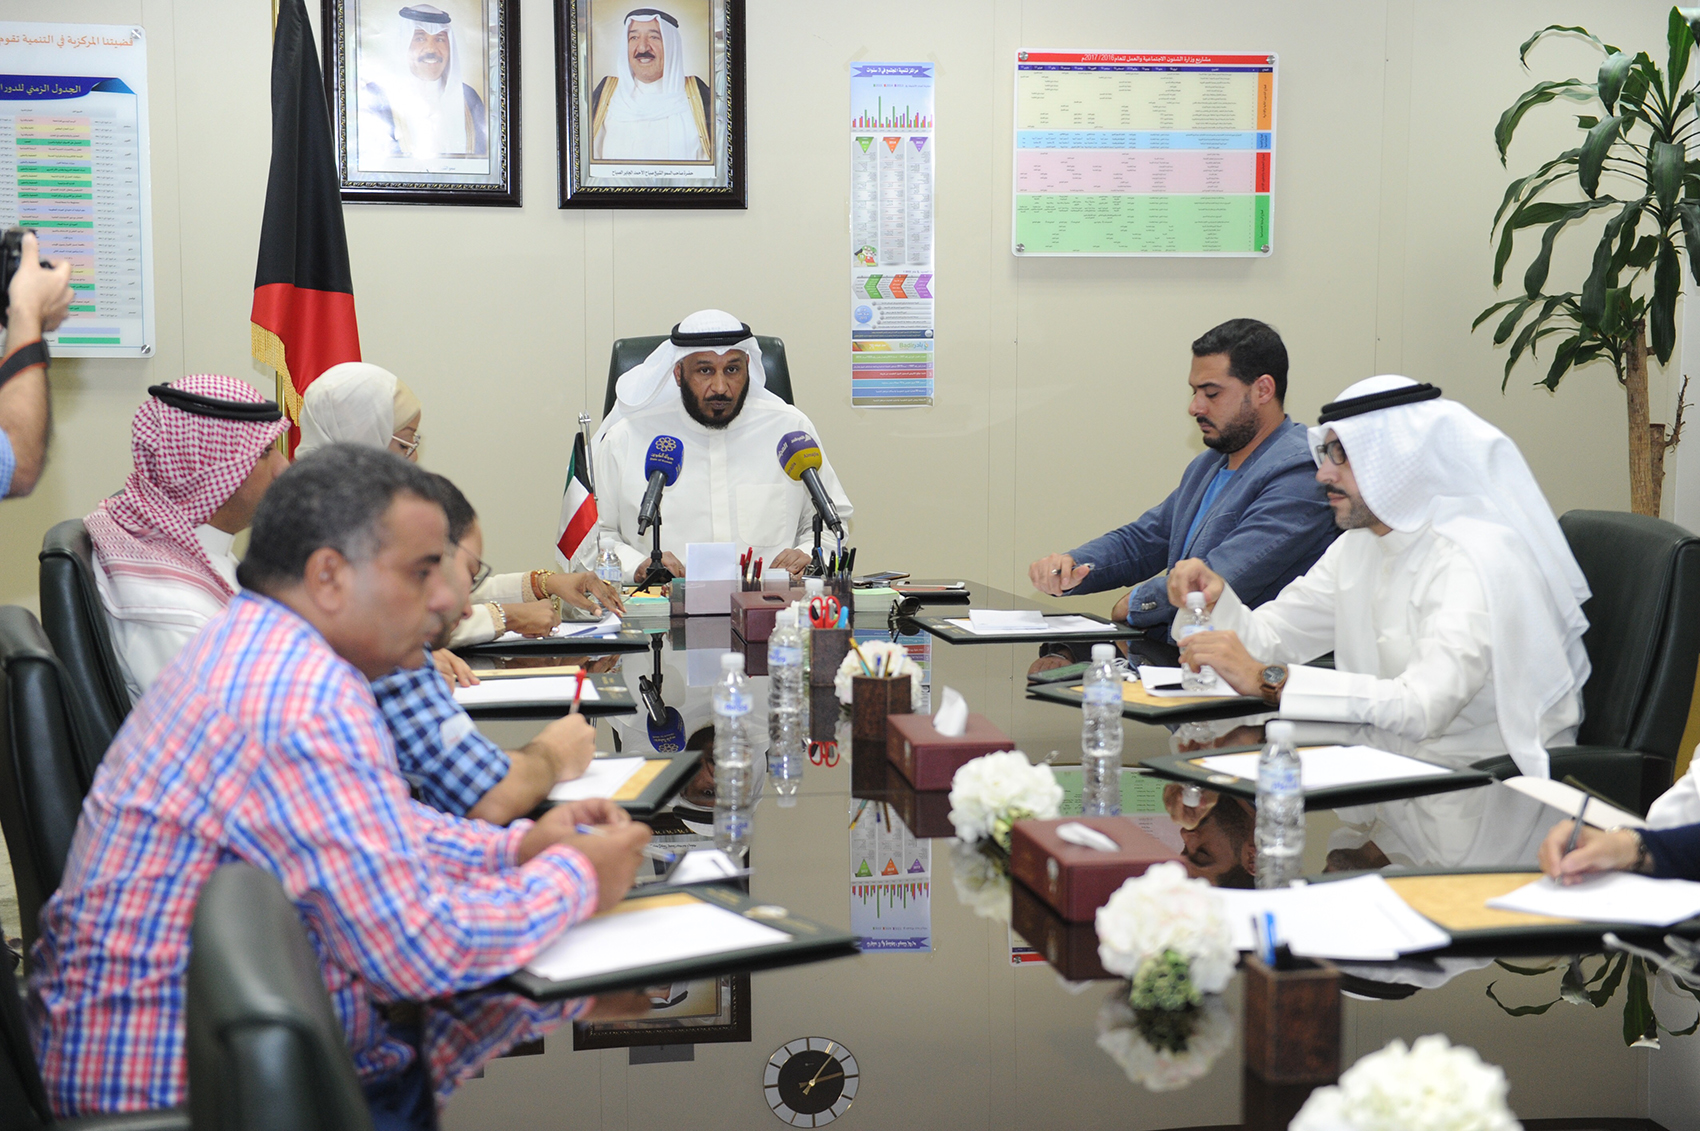 Undersecretary of the Ministry of Social Affairs and Labor Saad Al-Kharraz during the press conference